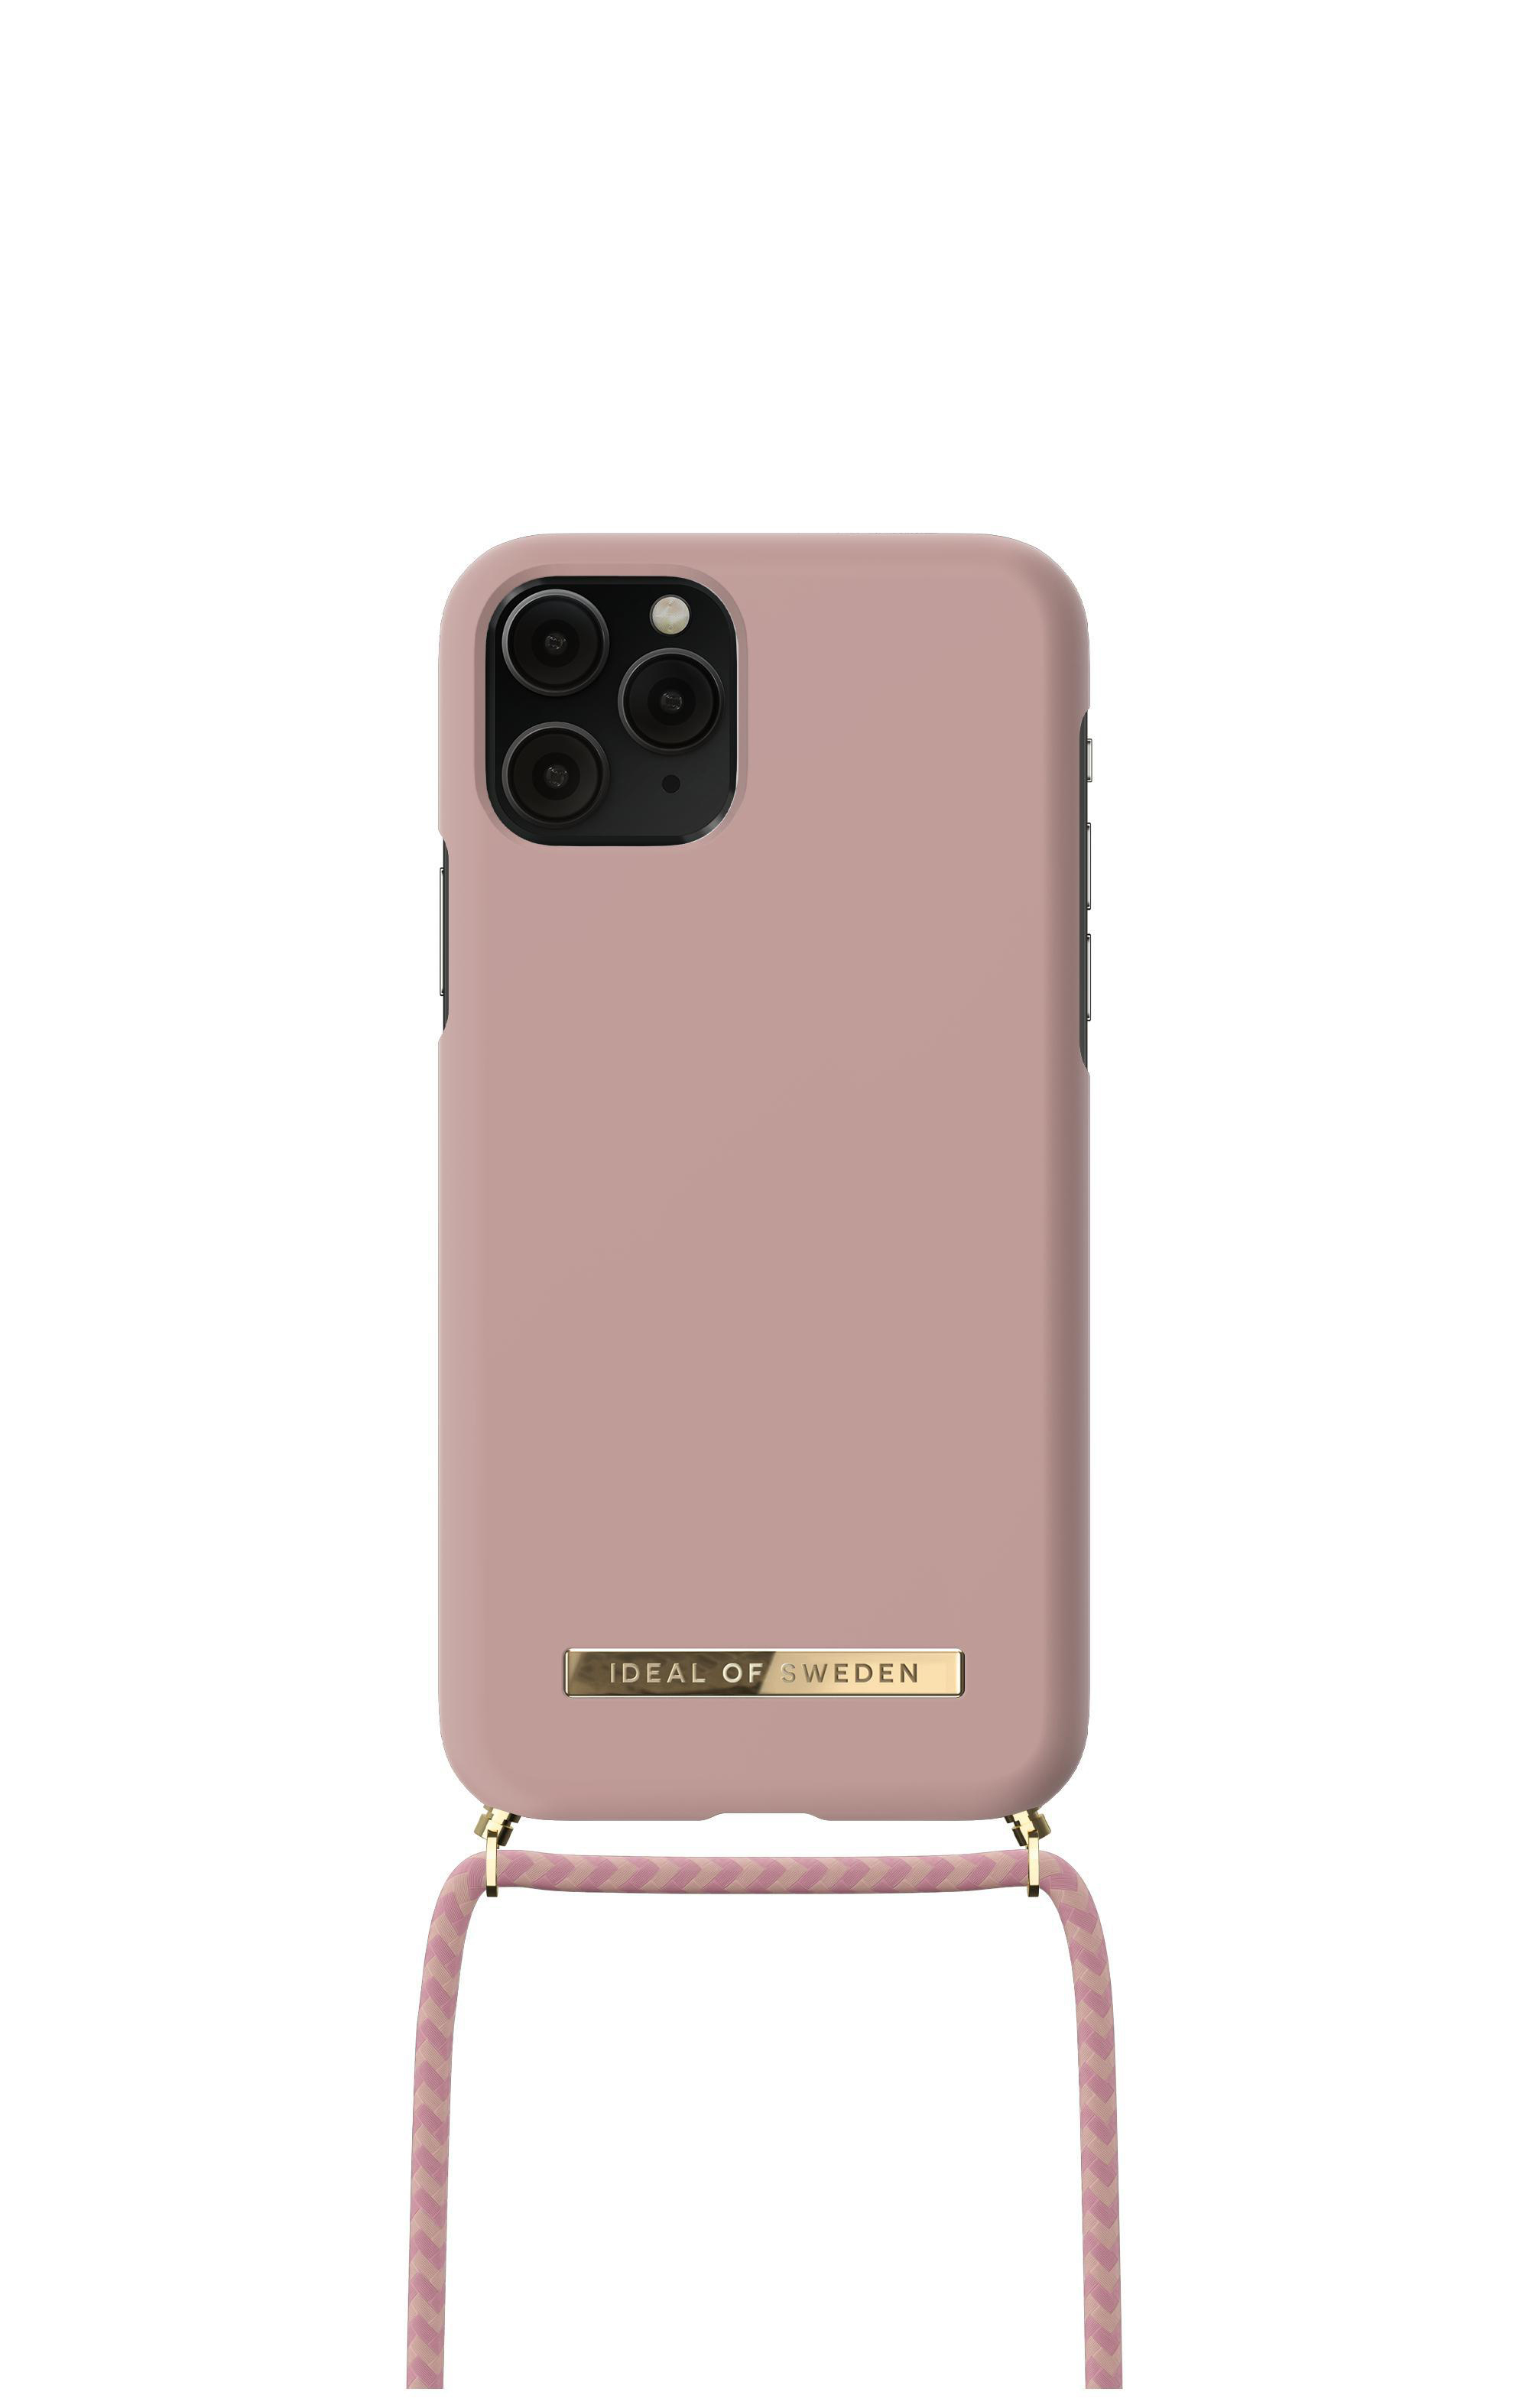 XS, OF Pink Pro, Backcover, IDEAL iPhone iPhone X, iPhone Apple, SWEDEN 11 Necklace,